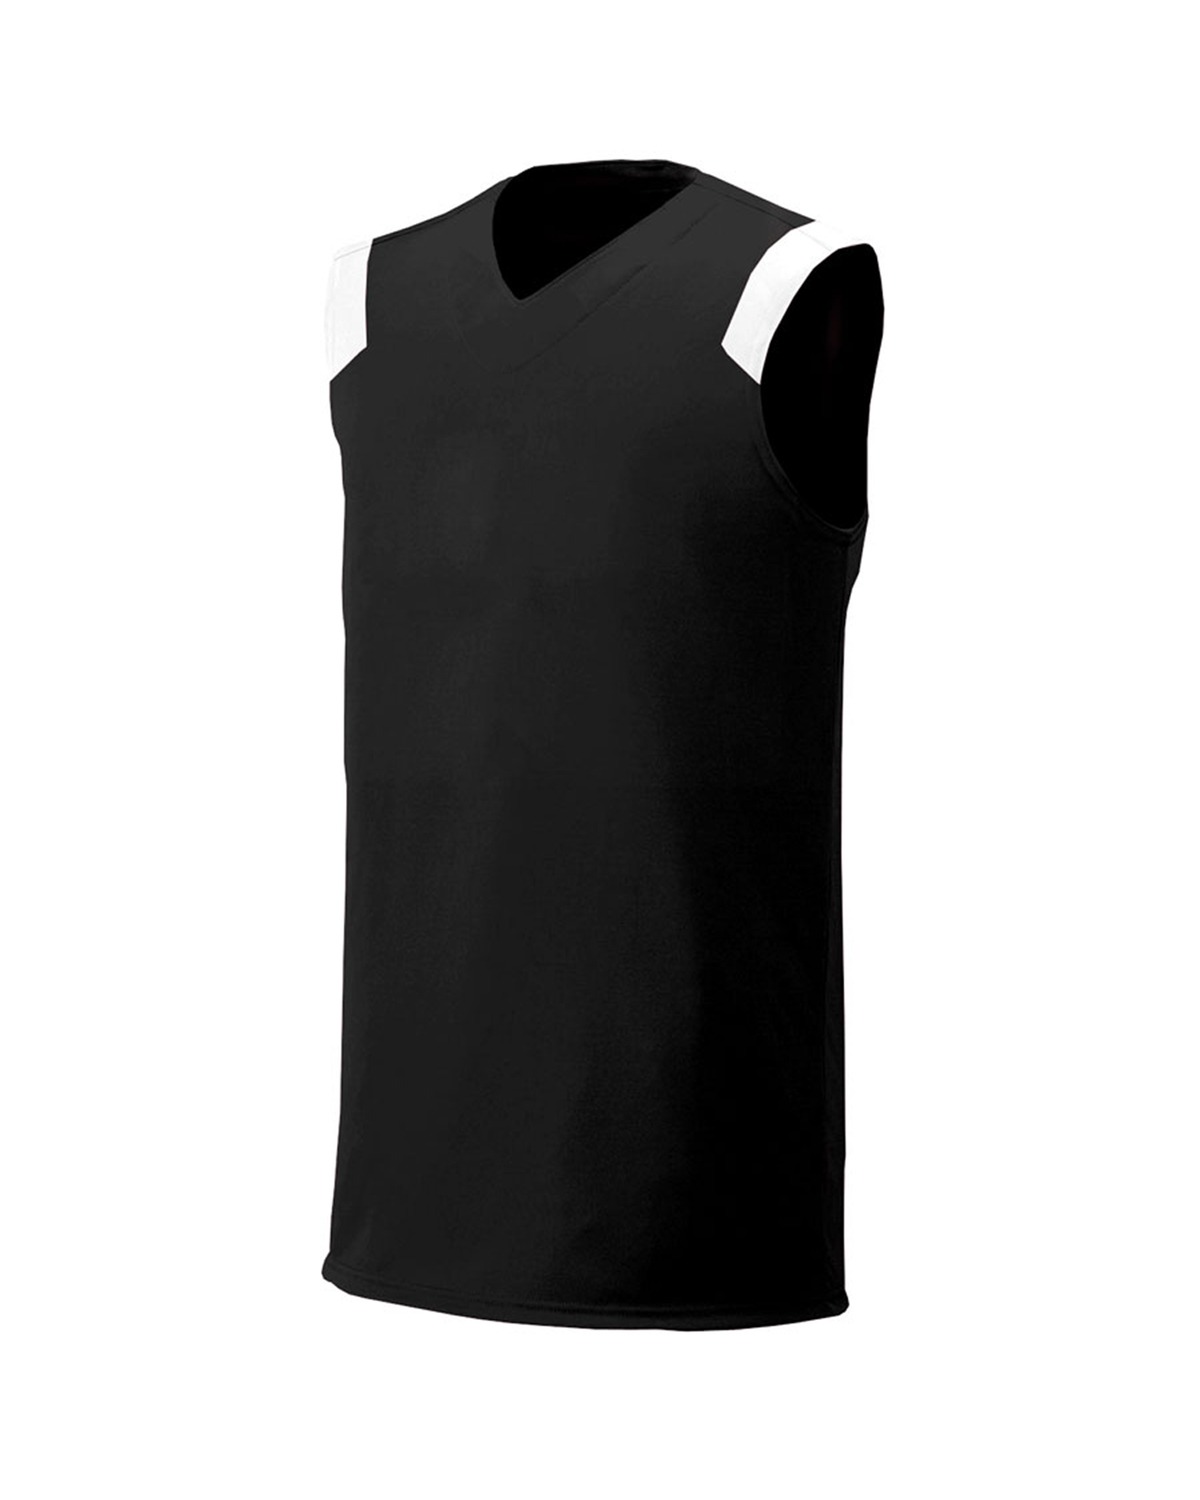 A4 Drop Ship - N2340 Adult V-Neck Muscle Tee $9.07 - T-Shirts